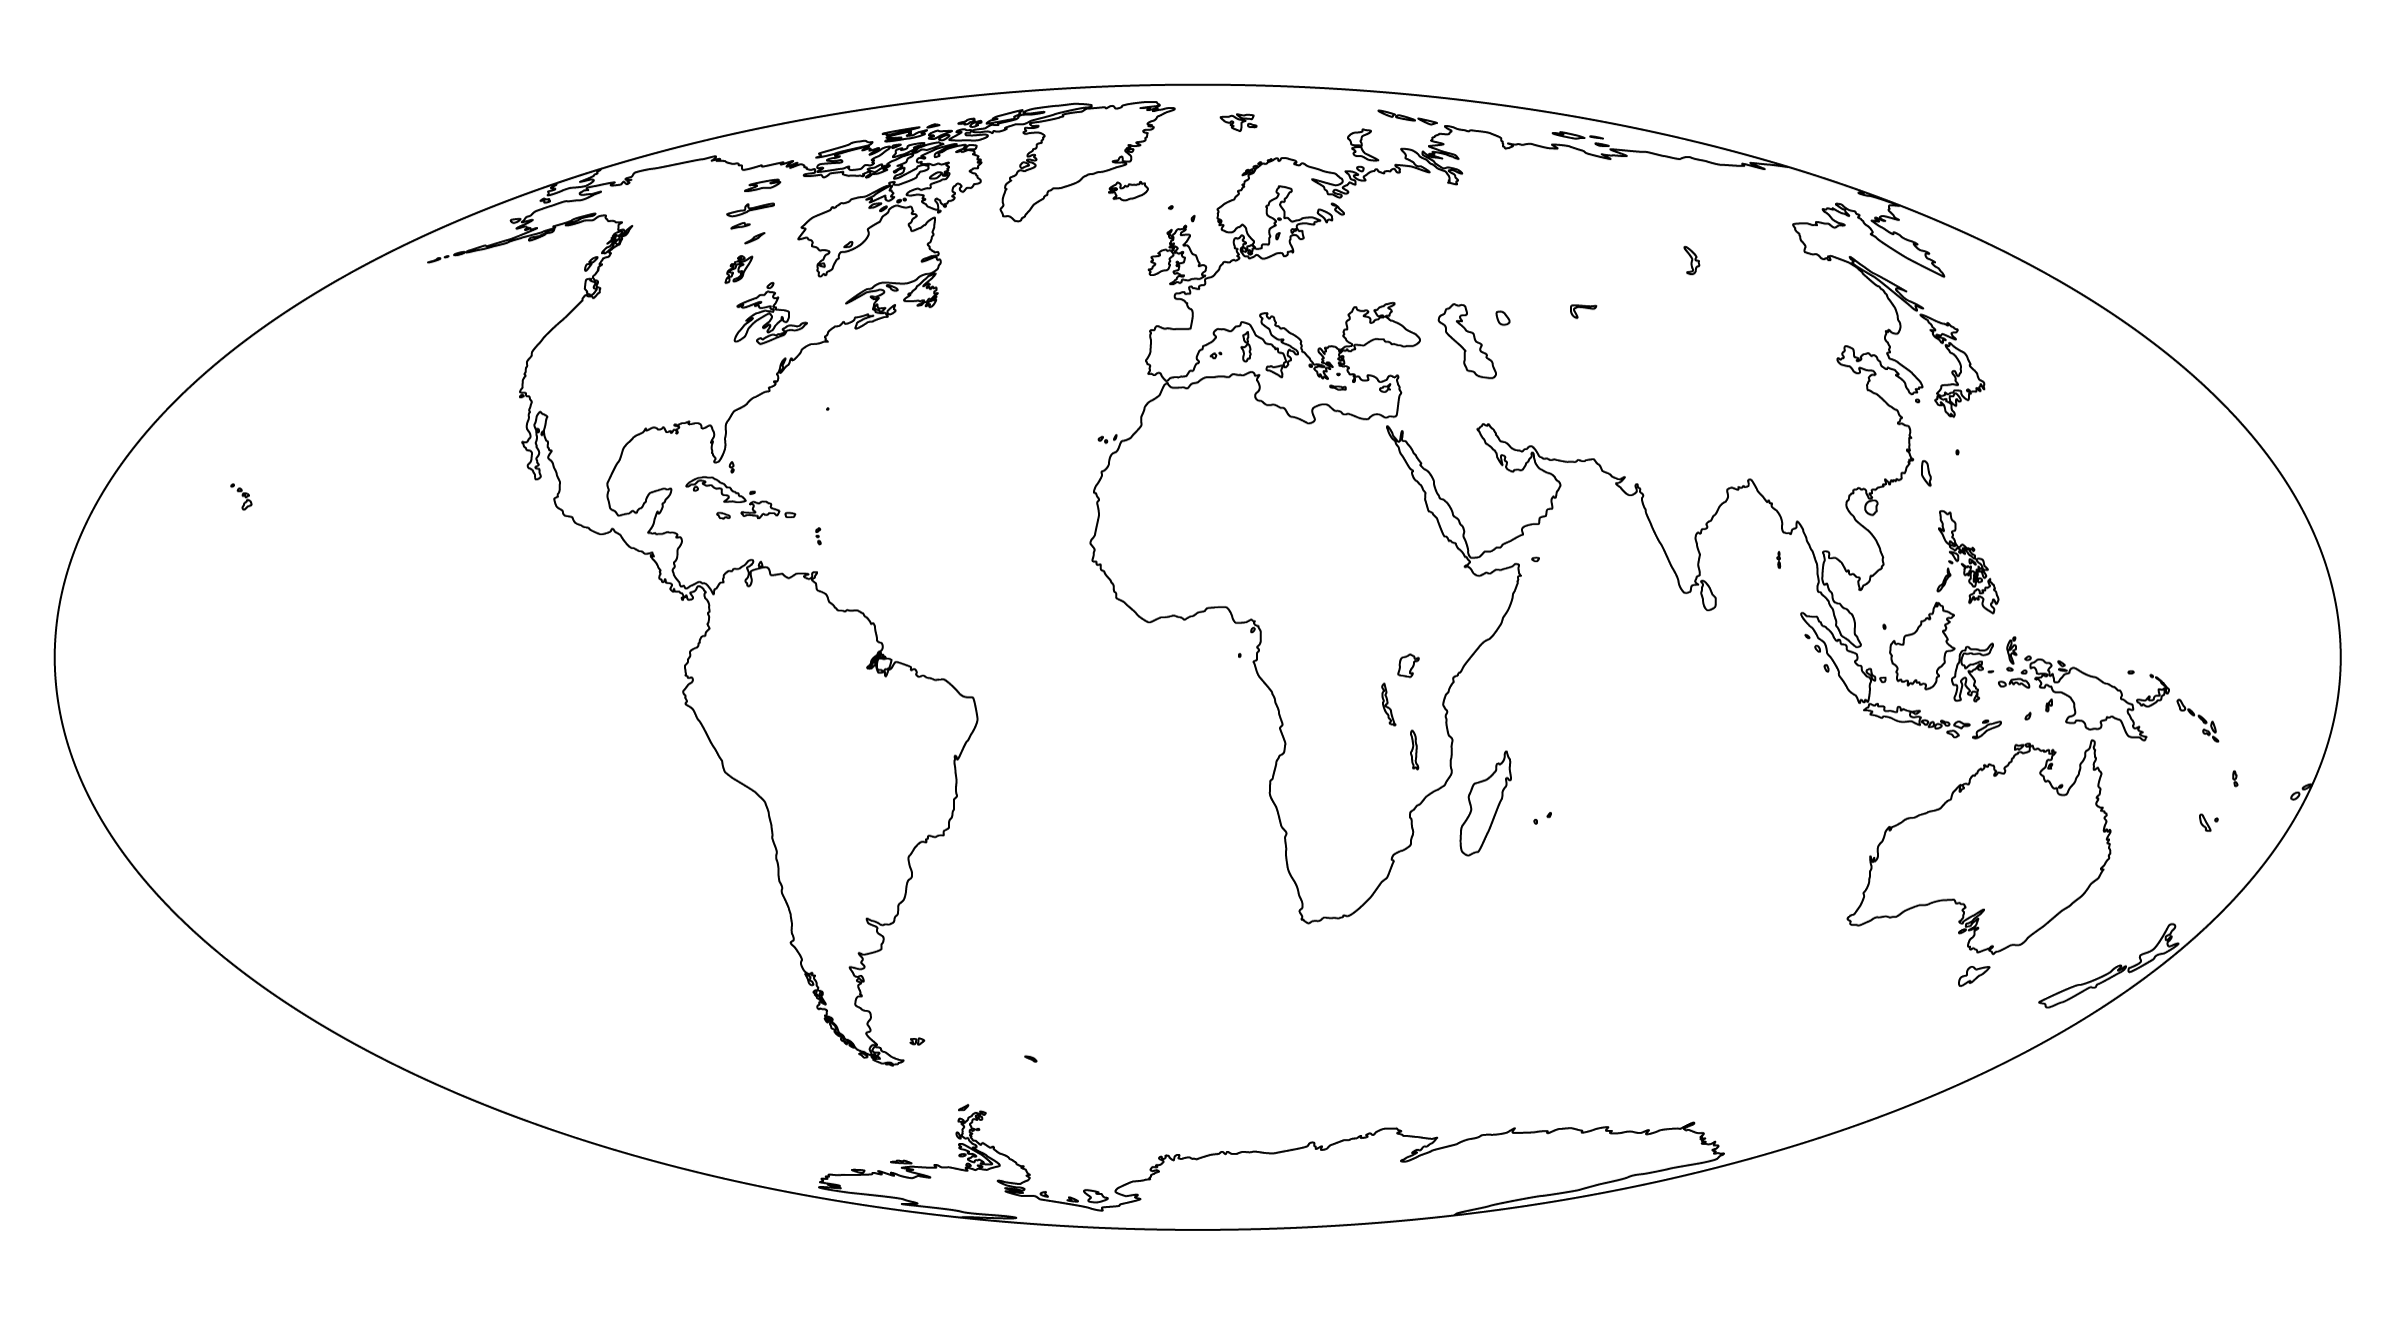 7 Continents Coloring Pages Sketch Coloring Page